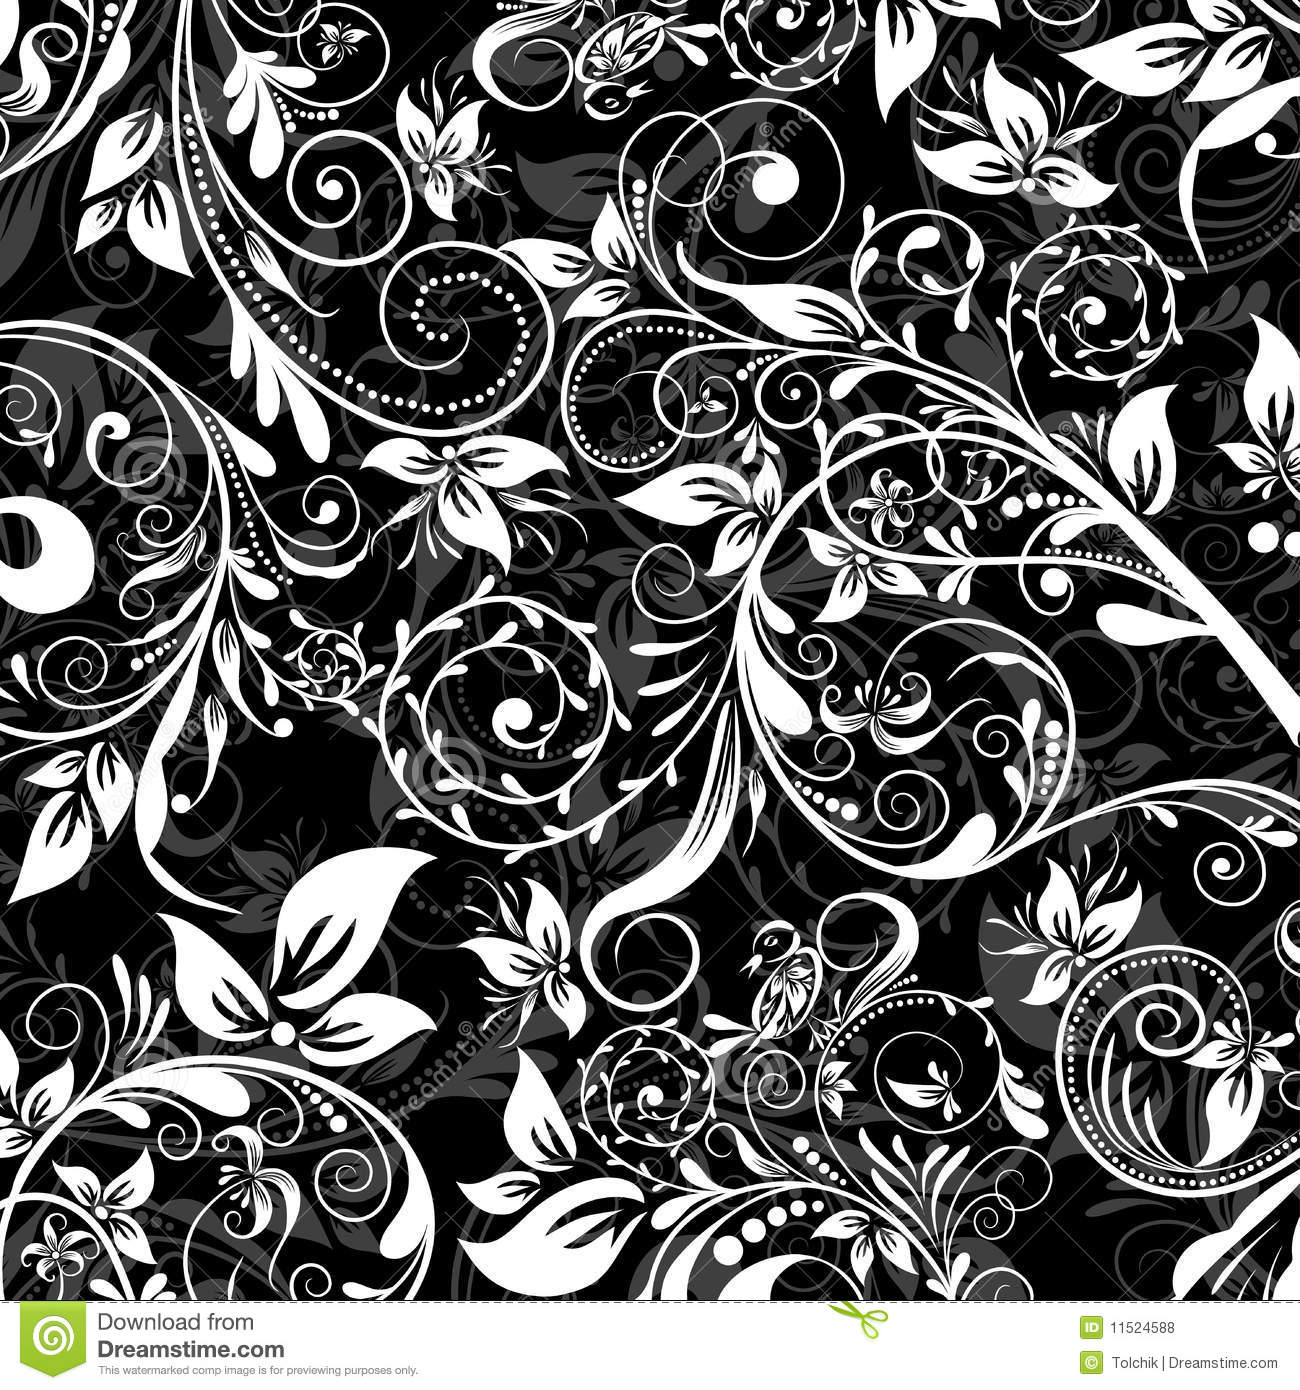 Abstract Floral Vector Patterns